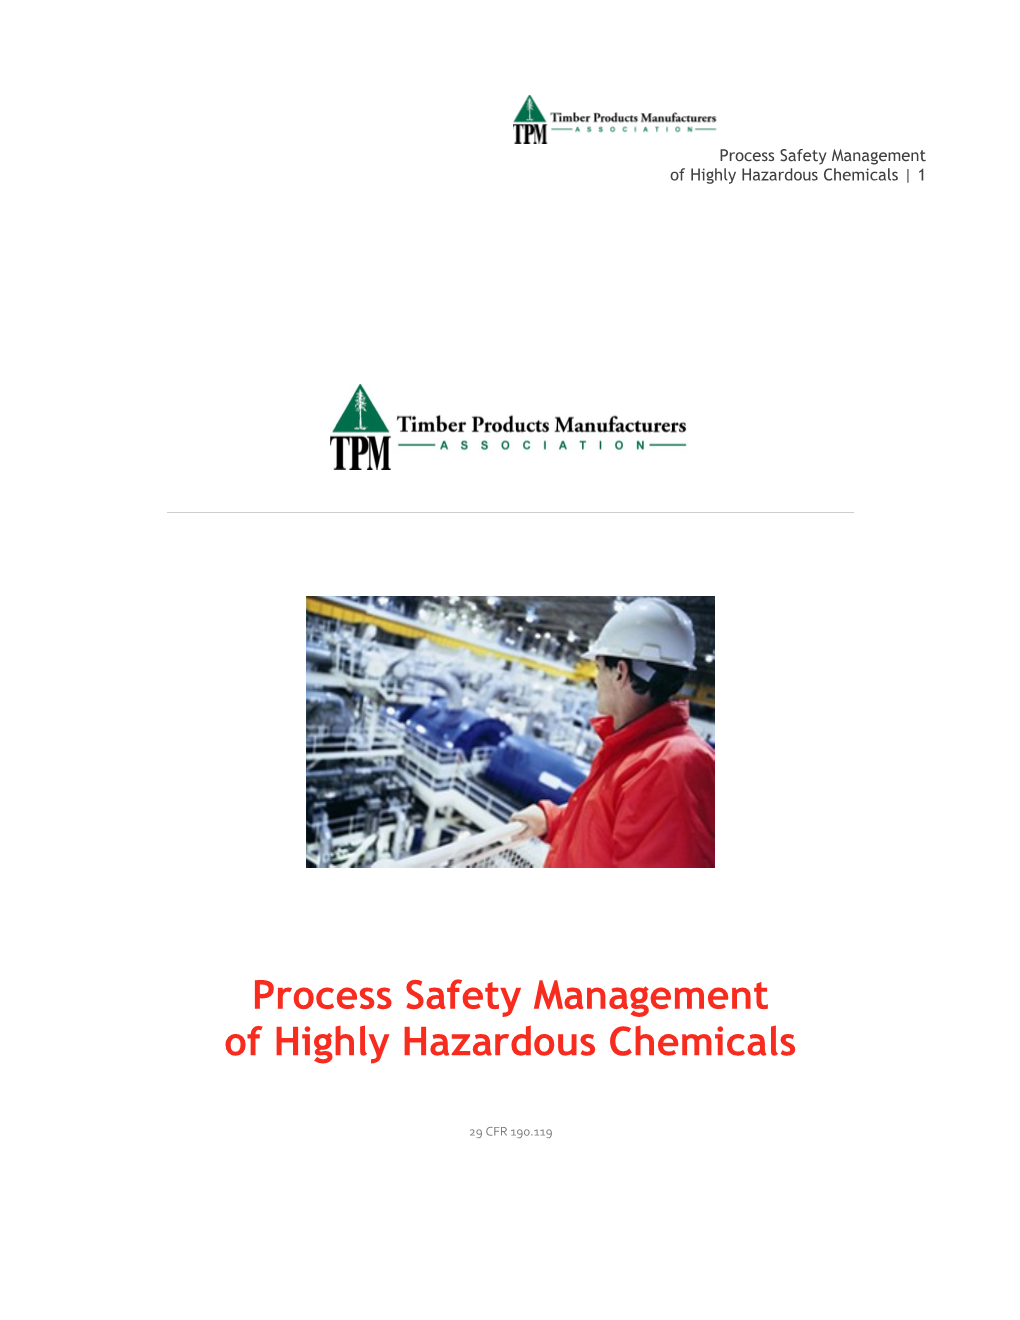 Process Safety Management of Highly Hazardous Chemicals